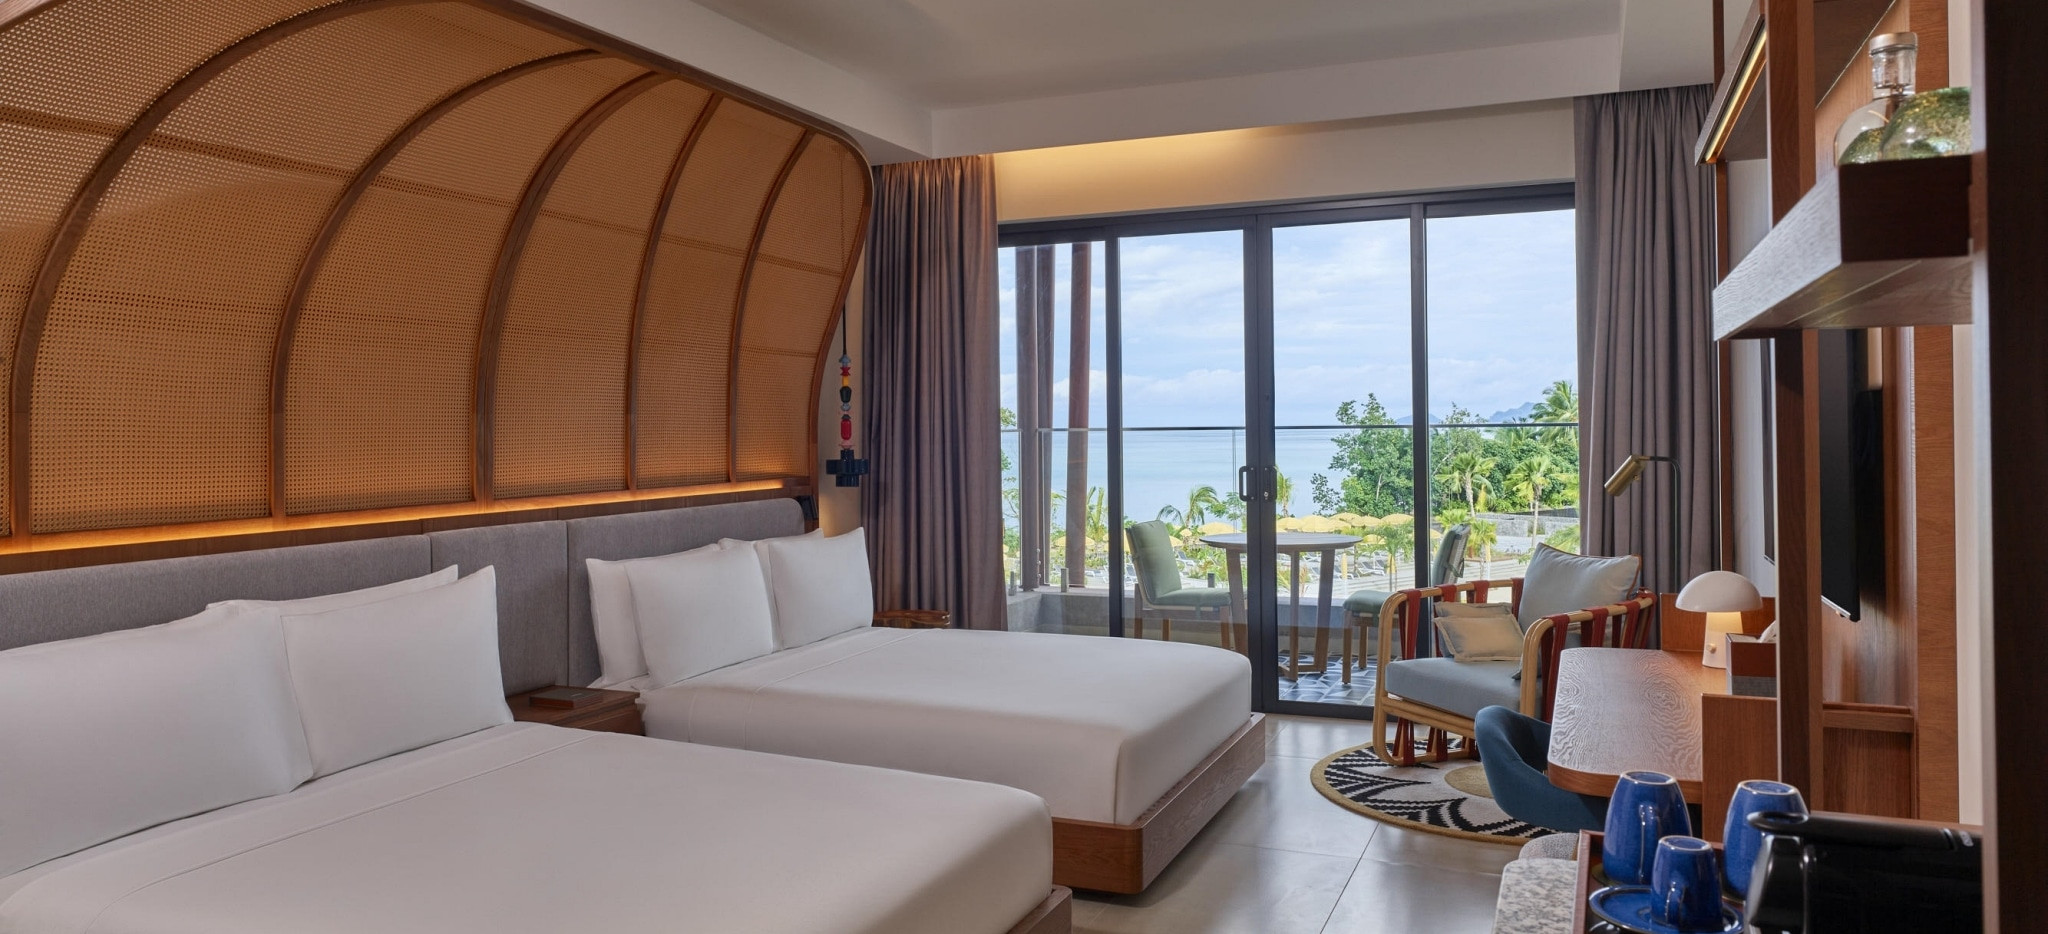 Ein Hotelzimmer der Kategorie Two Queen Beds Room with Pool View Room im Hotel Canopy by Hilton Seychelles